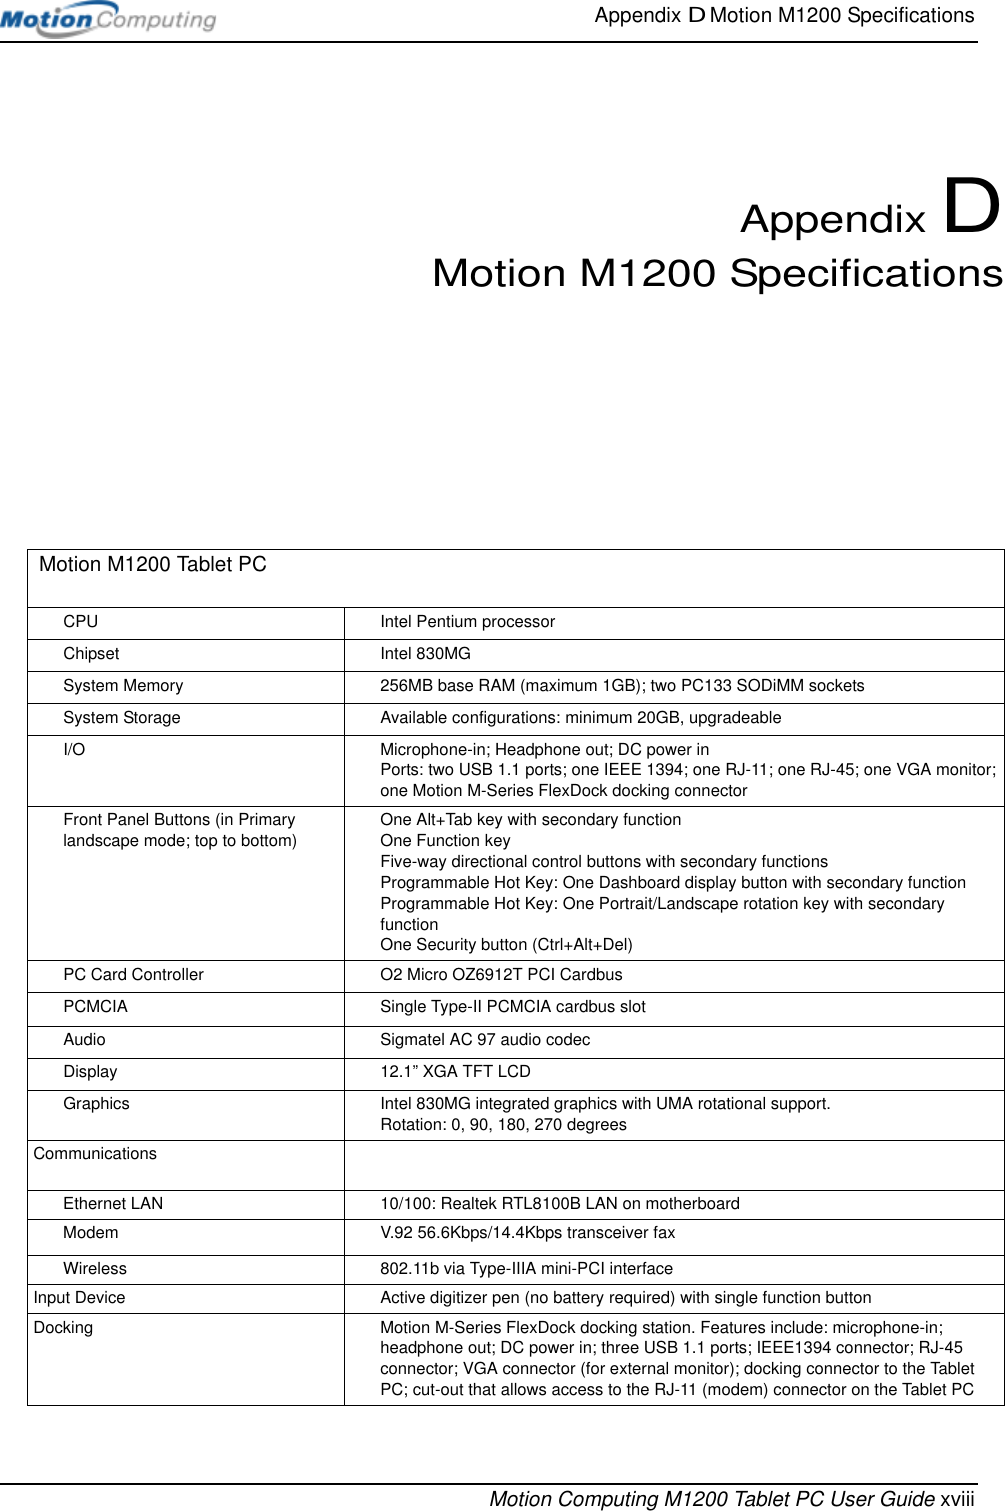 Appendix D Motion M1200 SpecificationsMotion Computing M1200 Tablet PC User Guide xviiiAppendix DMotion M1200 Specifications Motion M1200 Tablet PCCPU Intel Pentium processorChipset Intel 830MGSystem Memory 256MB base RAM (maximum 1GB); two PC133 SODiMM socketsSystem Storage Available configurations: minimum 20GB, upgradeableI/O Microphone-in; Headphone out; DC power in Ports: two USB 1.1 ports; one IEEE 1394; one RJ-11; one RJ-45; one VGA monitor; one Motion M-Series FlexDock docking connectorFront Panel Buttons (in Primary landscape mode; top to bottom)One Alt+Tab key with secondary functionOne Function keyFive-way directional control buttons with secondary functionsProgrammable Hot Key: One Dashboard display button with secondary functionProgrammable Hot Key: One Portrait/Landscape rotation key with secondary functionOne Security button (Ctrl+Alt+Del)PC Card Controller O2 Micro OZ6912T PCI Cardbus PCMCIA  Single Type-II PCMCIA cardbus slotAudio Sigmatel AC 97 audio codecDisplay 12.1” XGA TFT LCDGraphics Intel 830MG integrated graphics with UMA rotational support. Rotation: 0, 90, 180, 270 degreesCommunicationsEthernet LAN 10/100: Realtek RTL8100B LAN on motherboardModem V.92 56.6Kbps/14.4Kbps transceiver faxWireless 802.11b via Type-IIIA mini-PCI interfaceInput Device Active digitizer pen (no battery required) with single function button Docking Motion M-Series FlexDock docking station. Features include: microphone-in; headphone out; DC power in; three USB 1.1 ports; IEEE1394 connector; RJ-45 connector; VGA connector (for external monitor); docking connector to the Tablet PC; cut-out that allows access to the RJ-11 (modem) connector on the Tablet PC